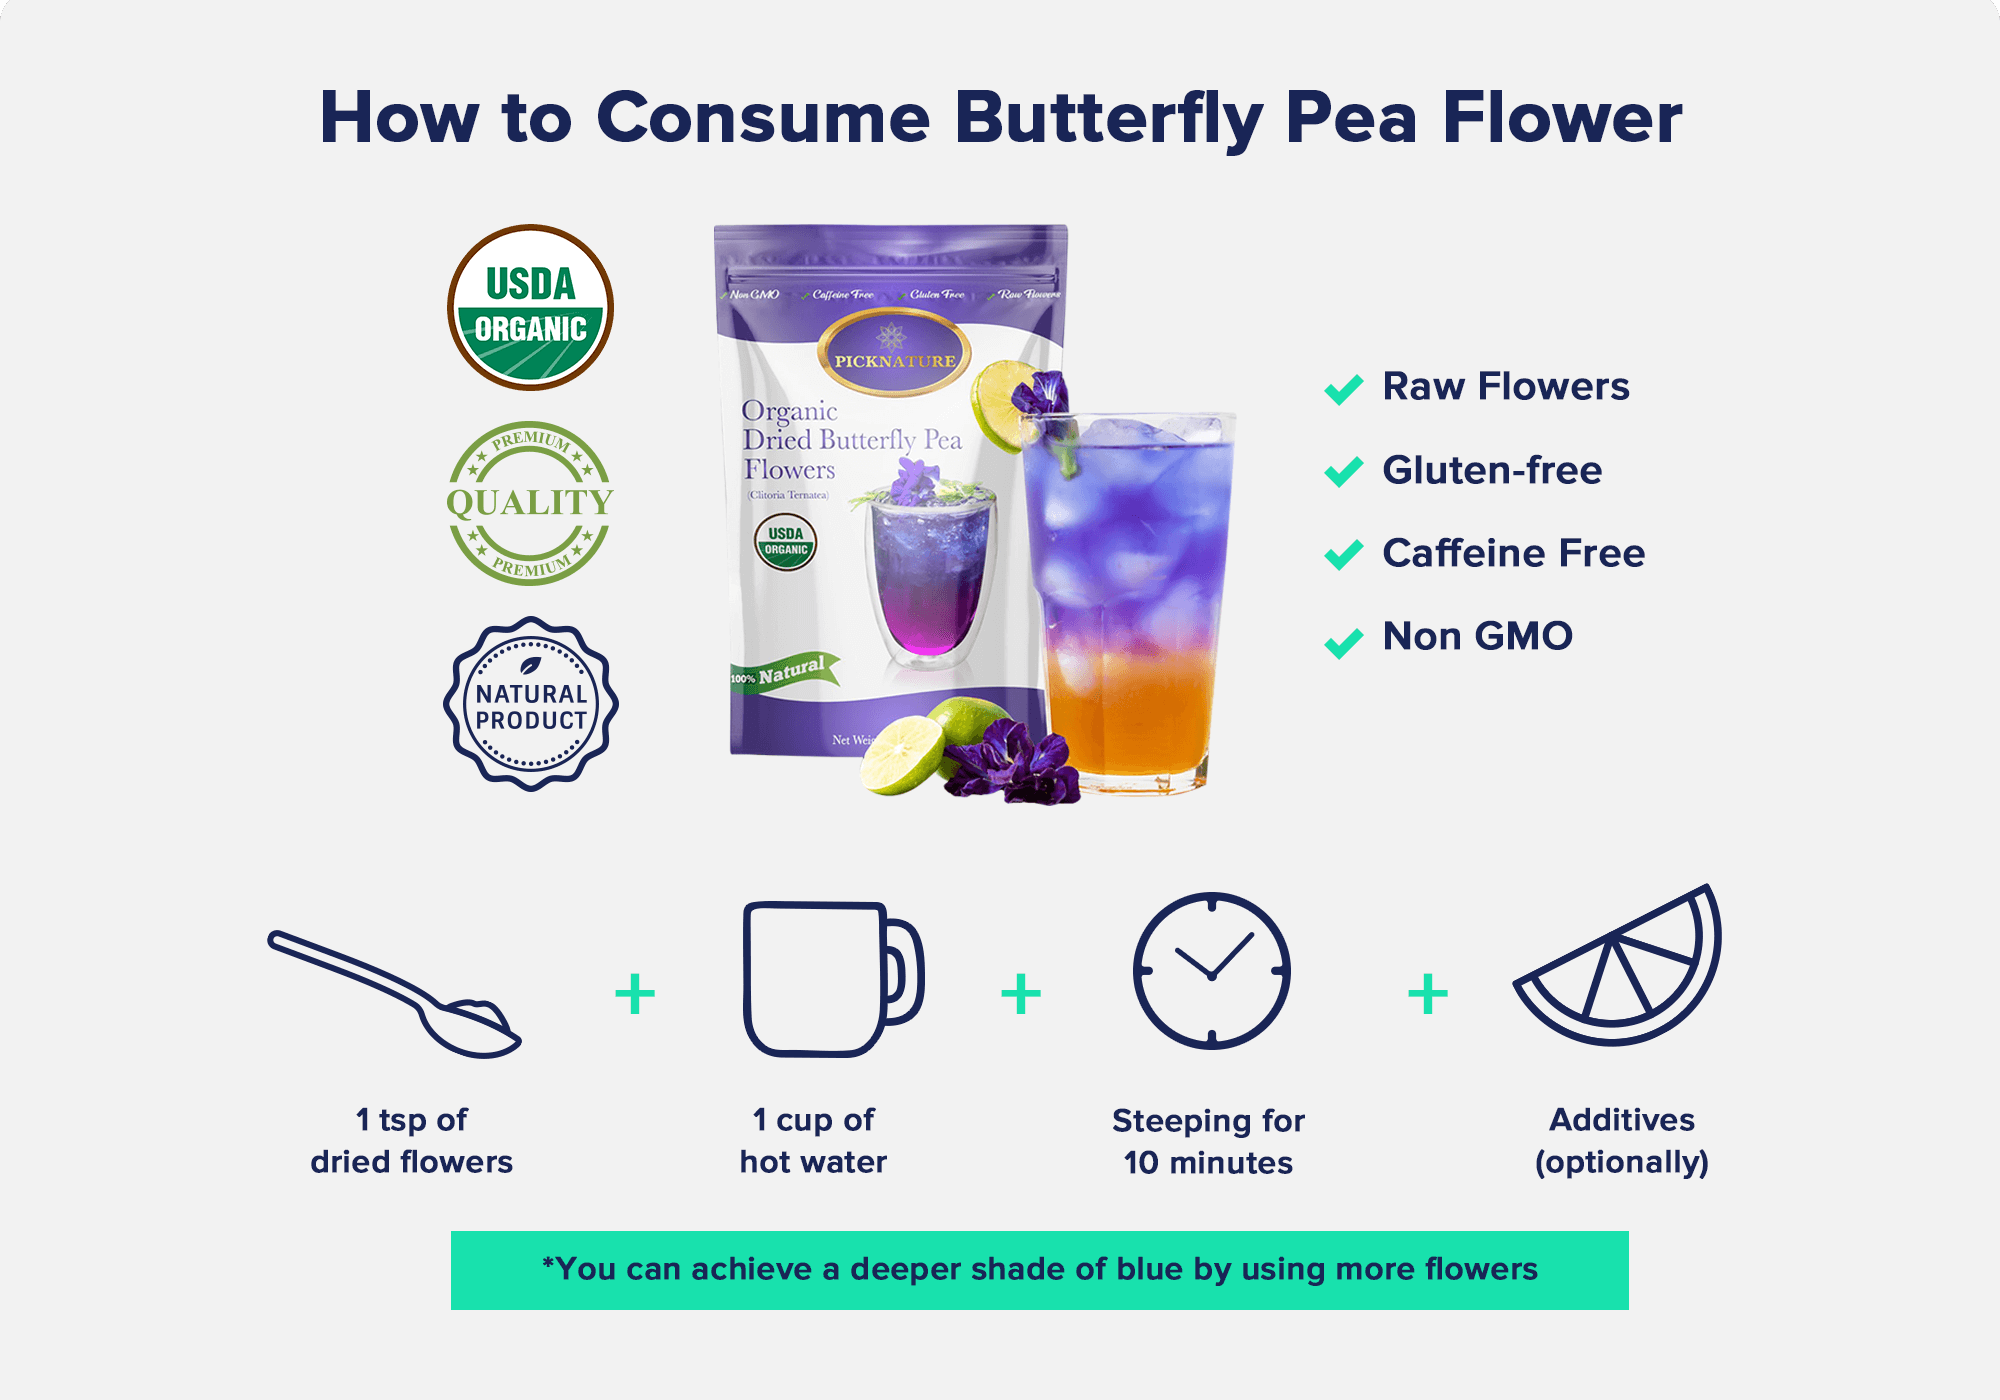 How to consume Butterfly Pea Flower1 tsp of dried flowers + 1 cup of hot water + Steeping for 1 minutes + Additives (optionally)